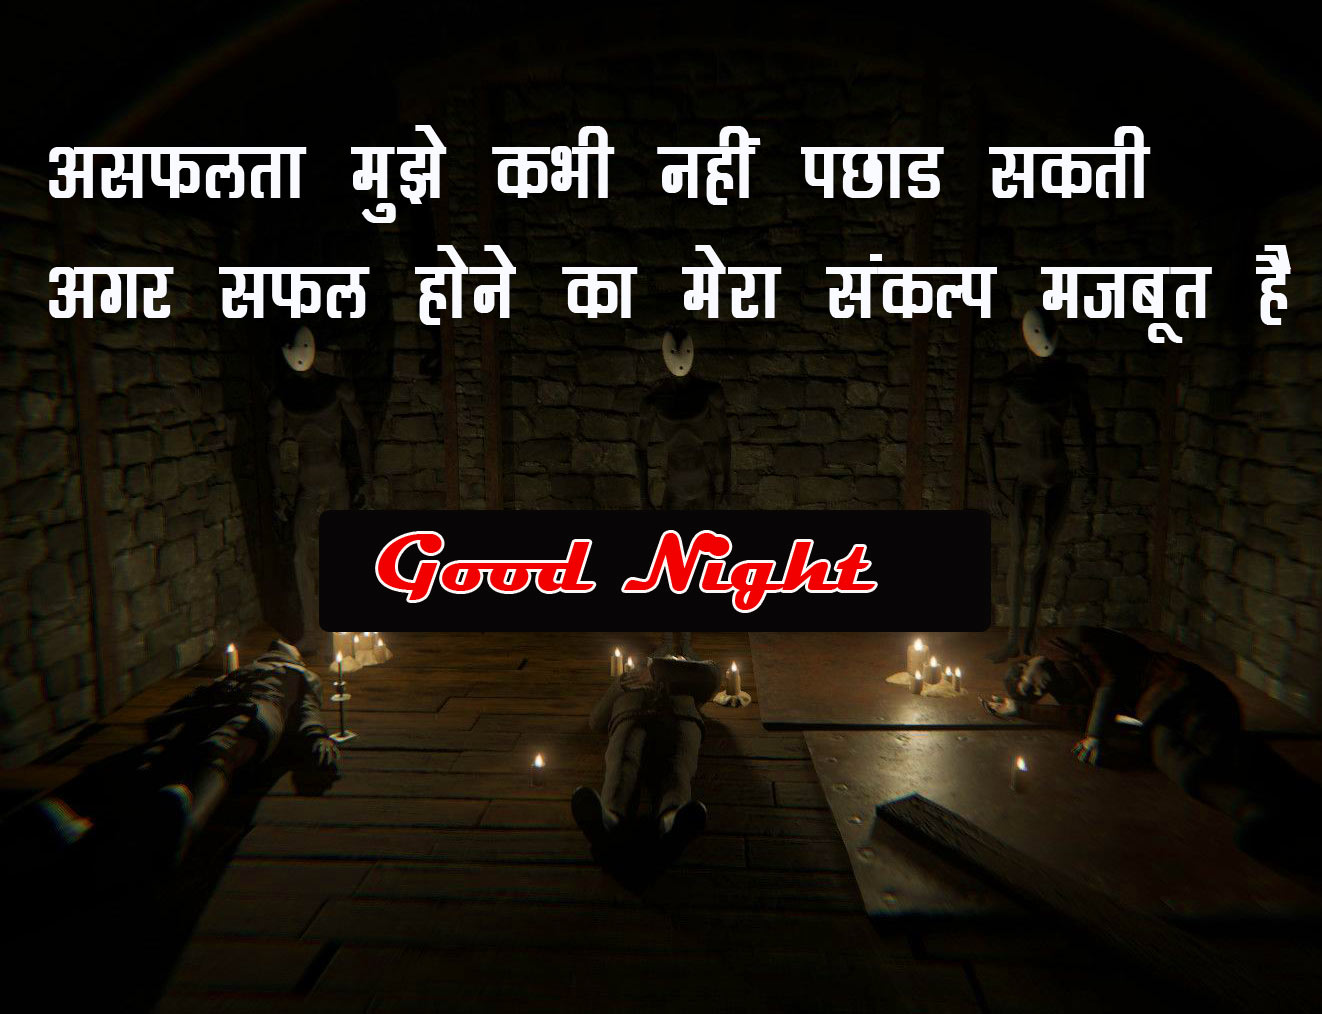 Hindi Motivational Quotes Good Night  Images Download 